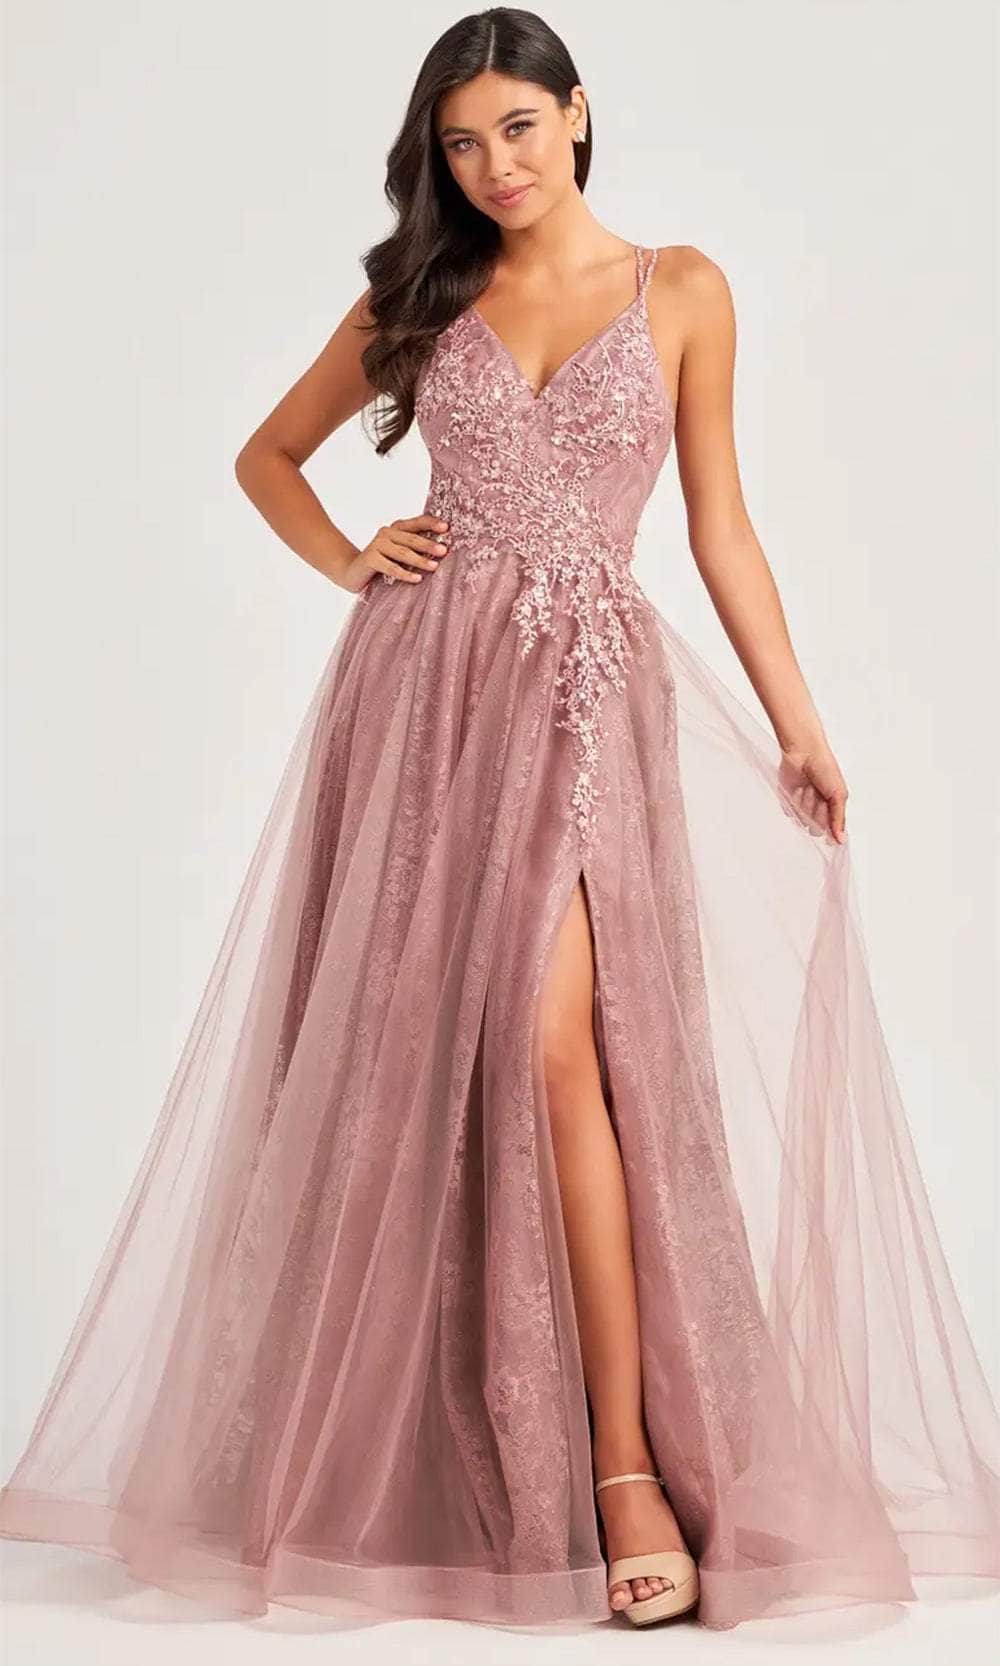 Image of Colette By Daphne CL5197 - Strappy Glitter Prom Dress